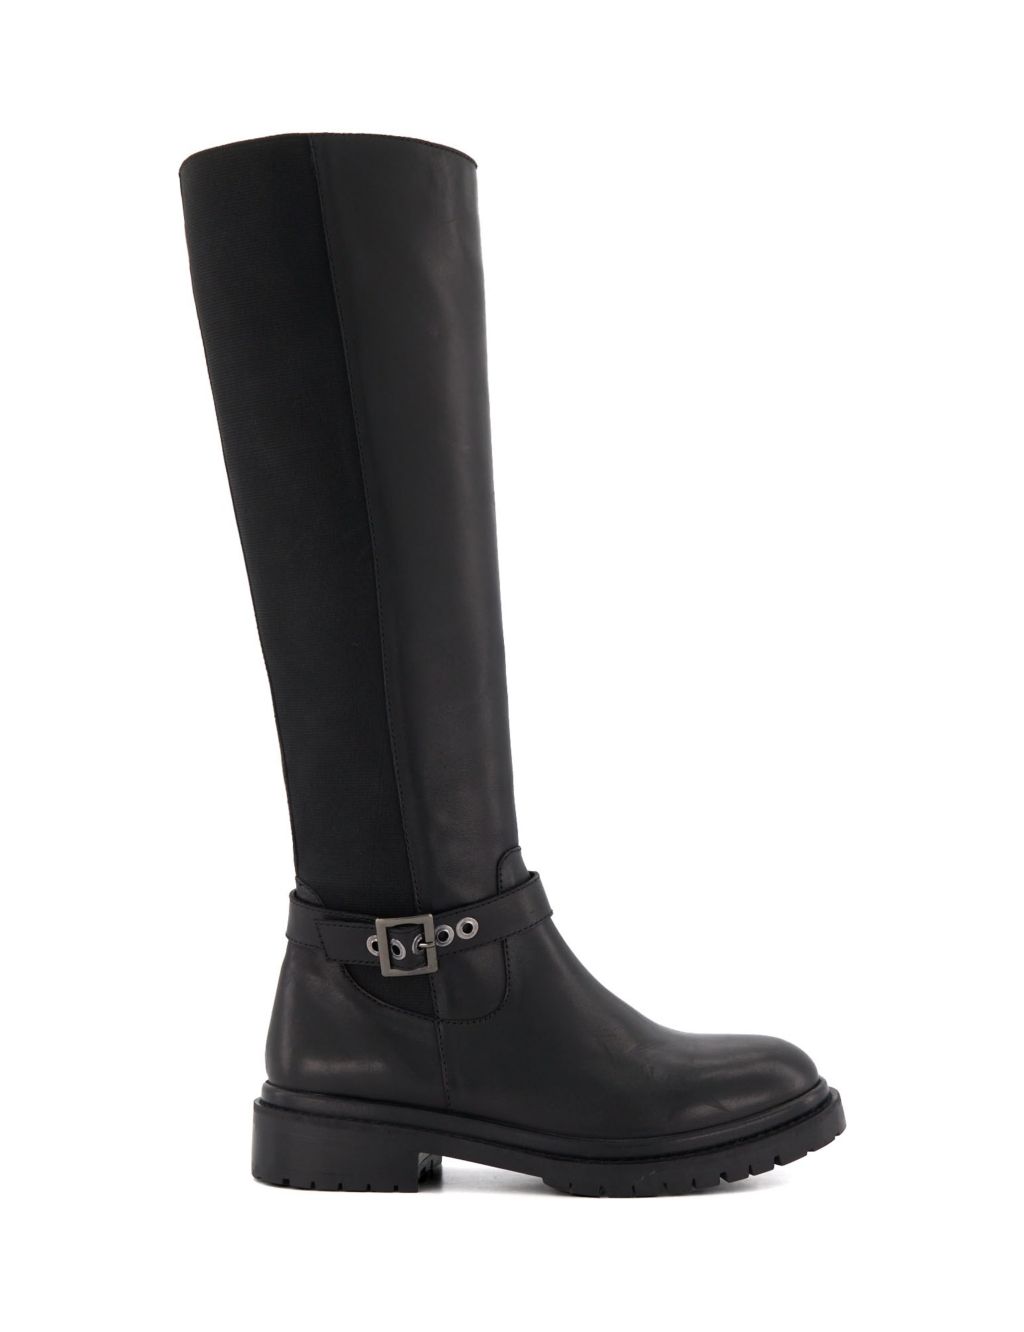 Leather Buckle Flat Knee High Boots